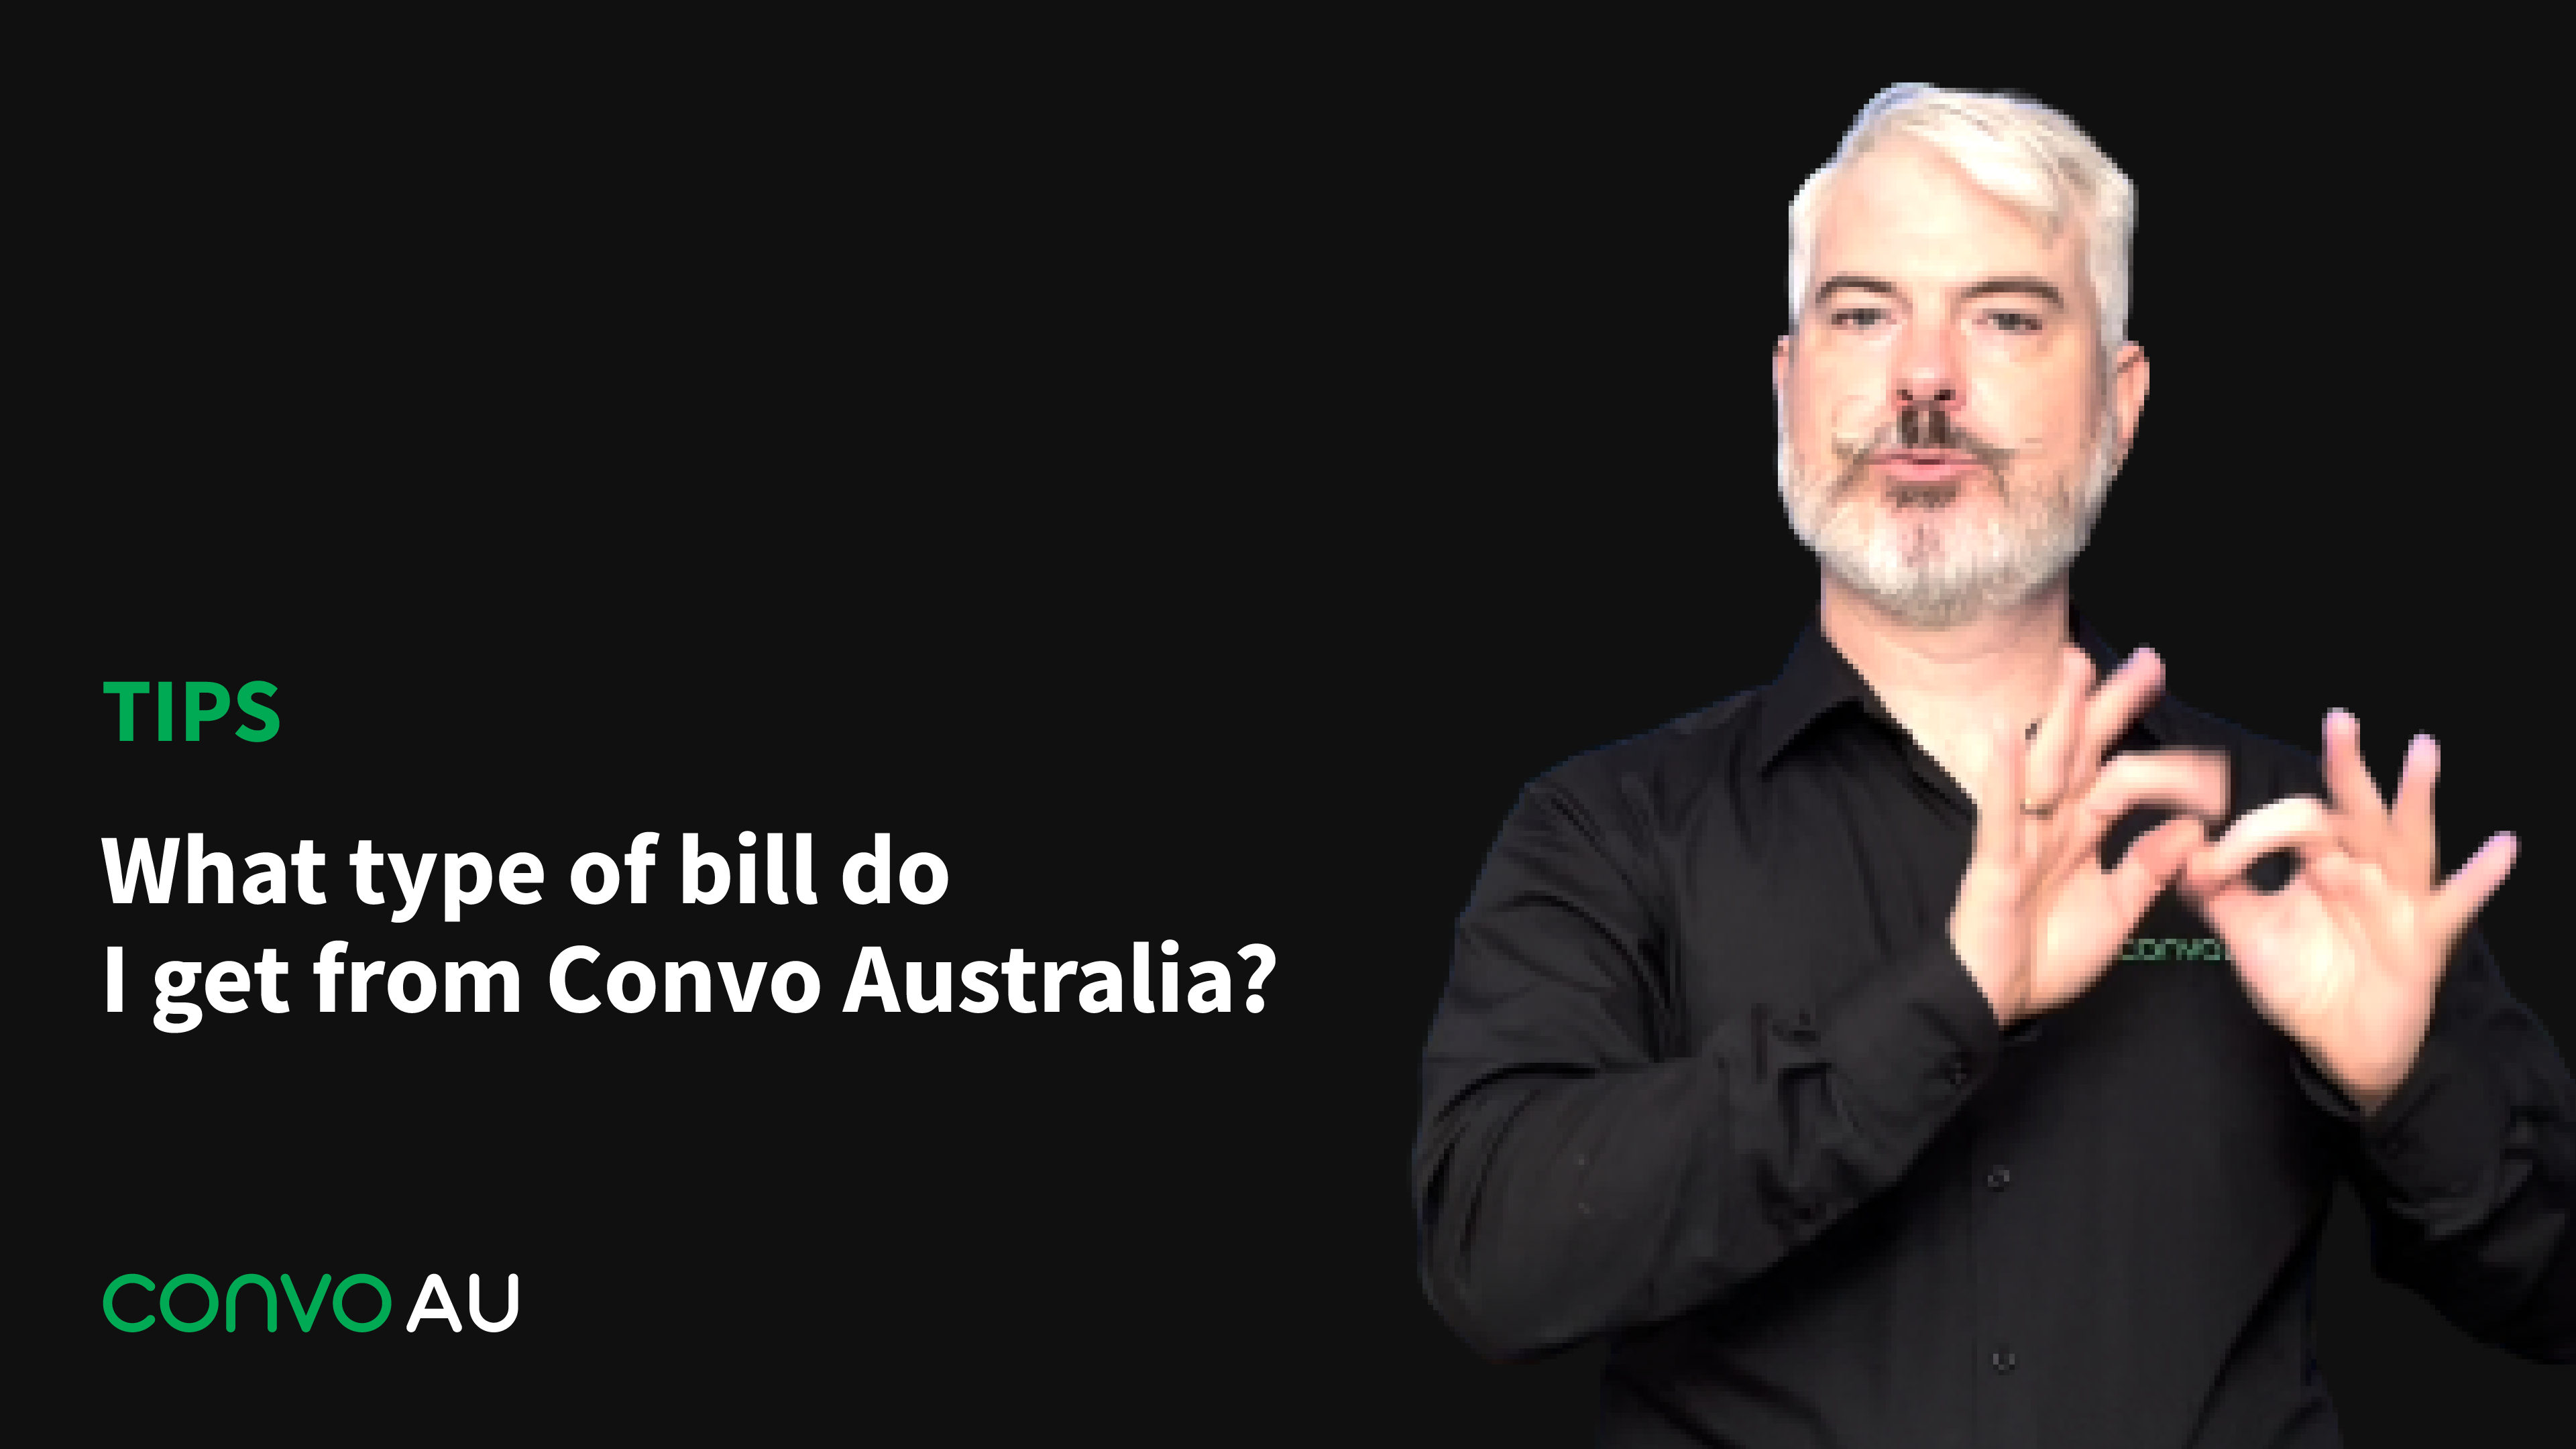 Tips: What type of bill do I get from Convo Australia?